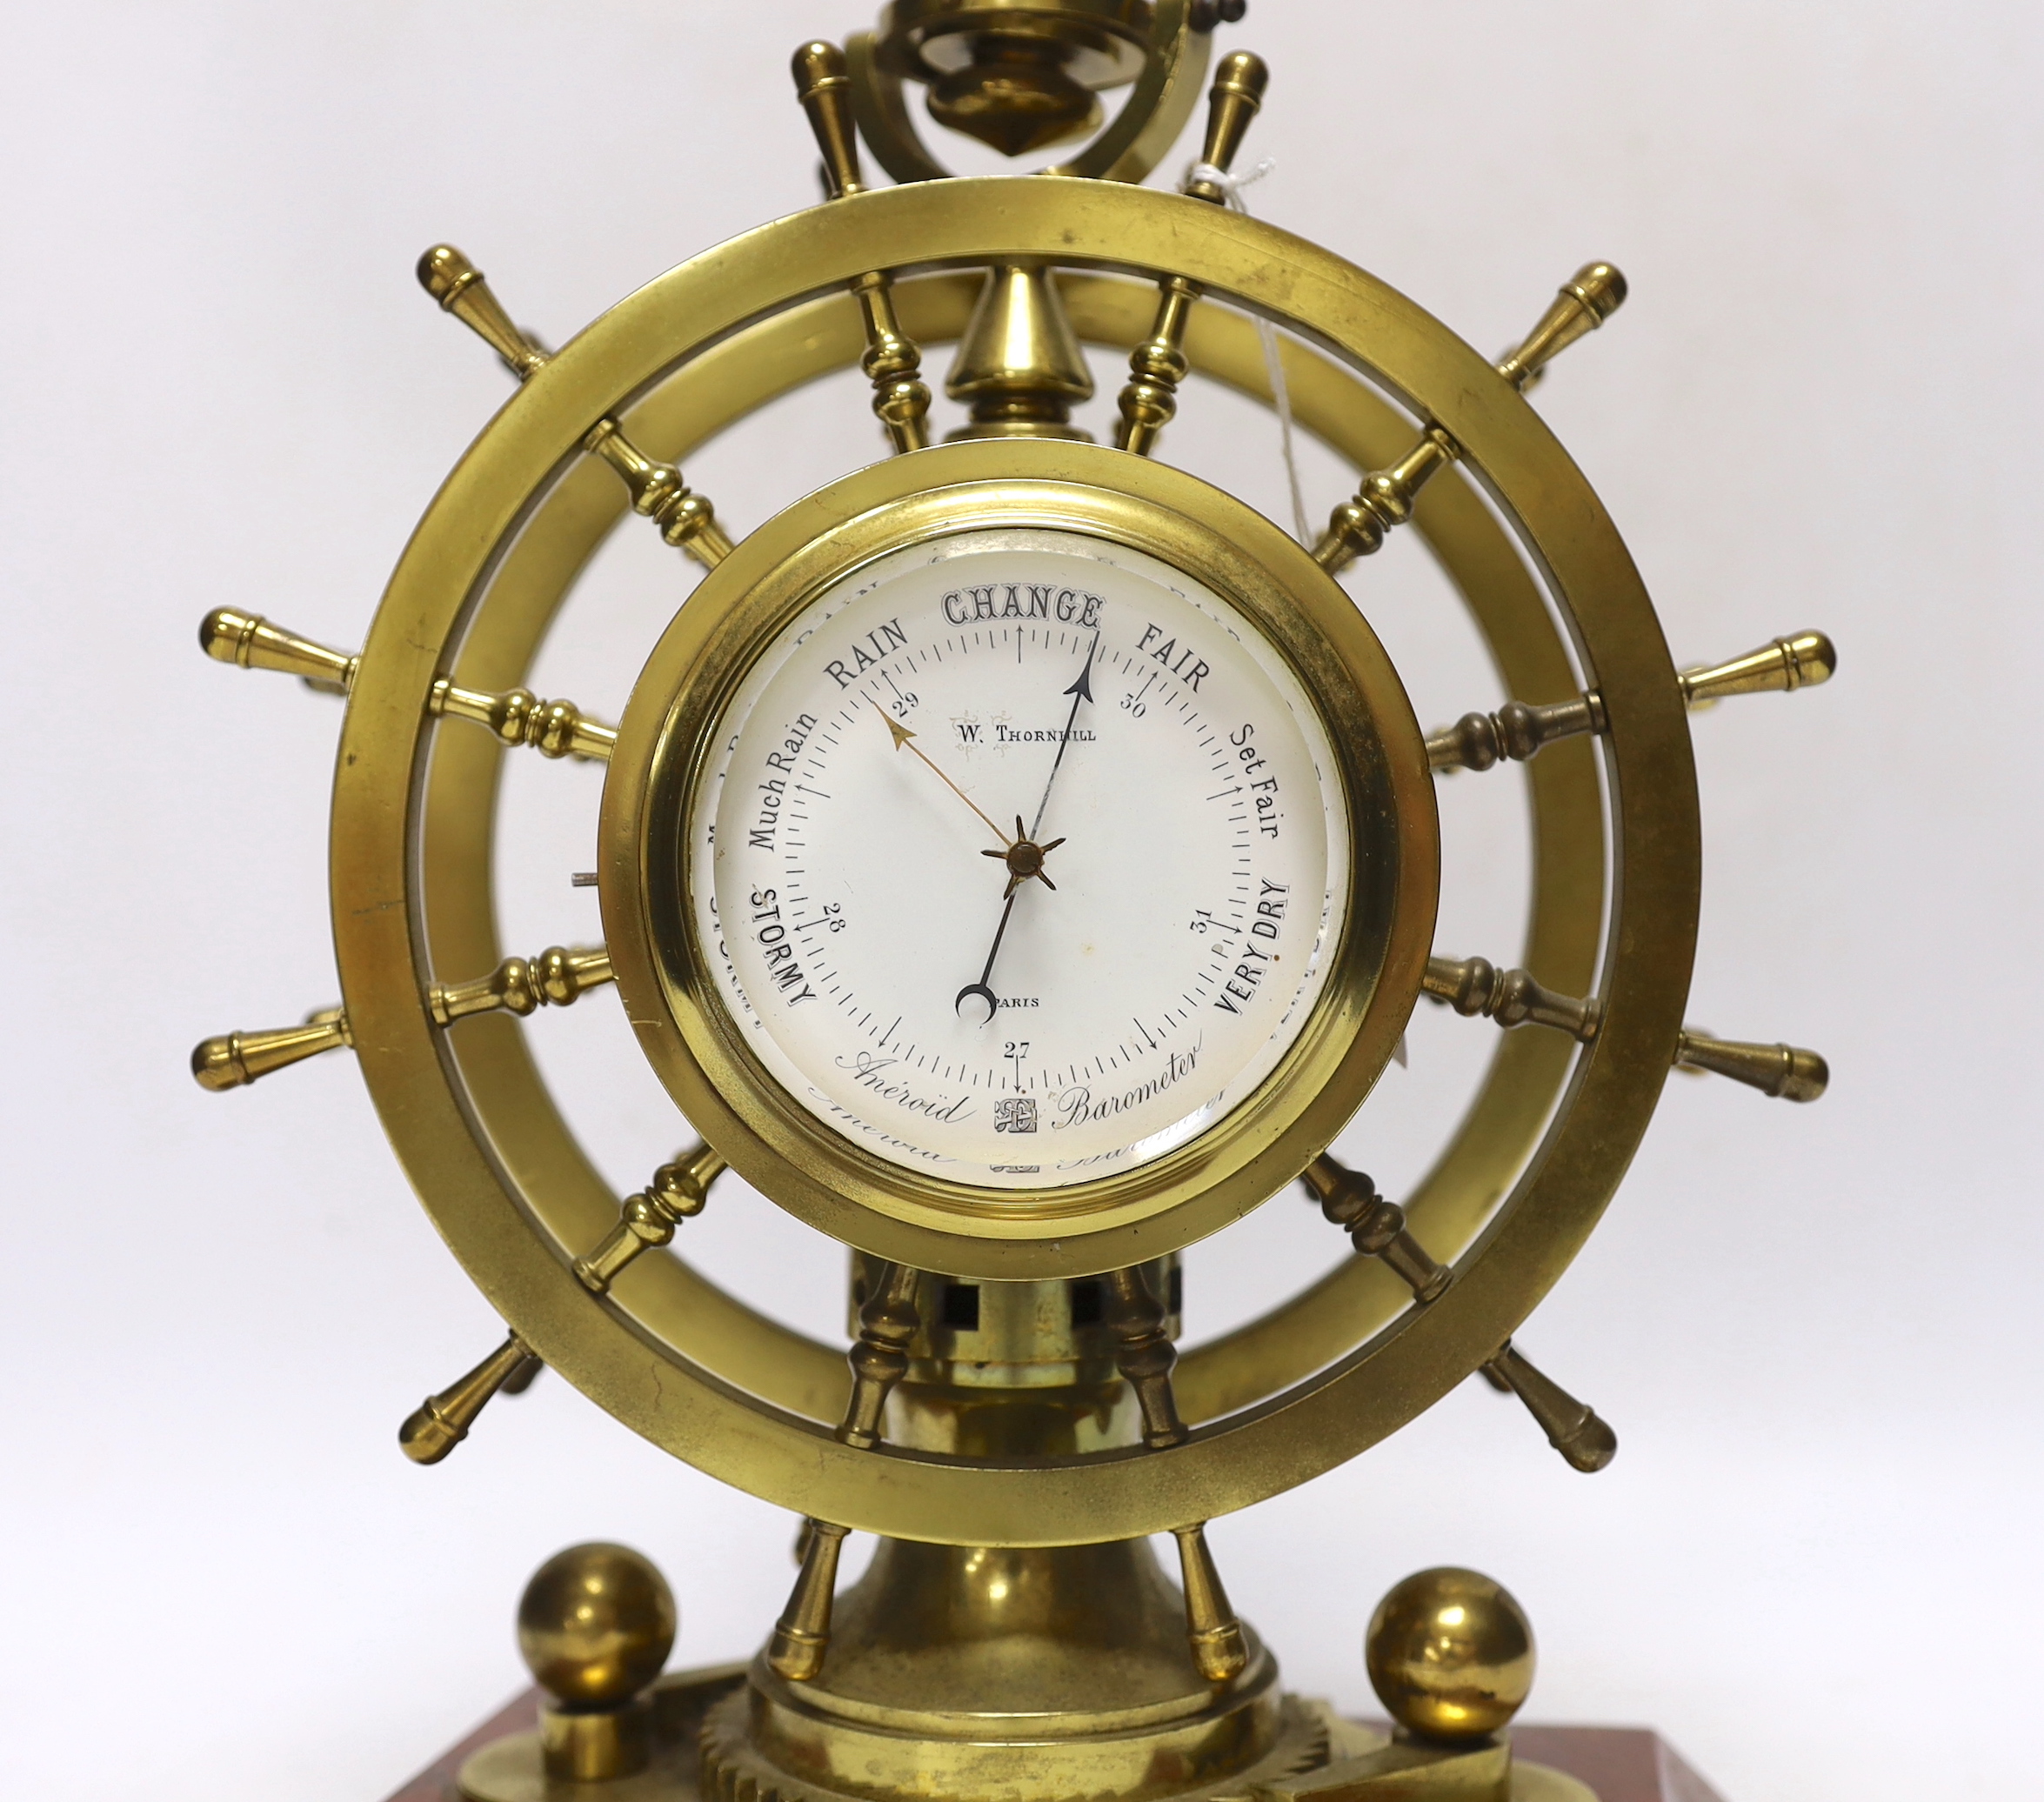 A late Victorian brass and marble ship's wheel timepiece with aneroid barometer and compass, 29.5cm